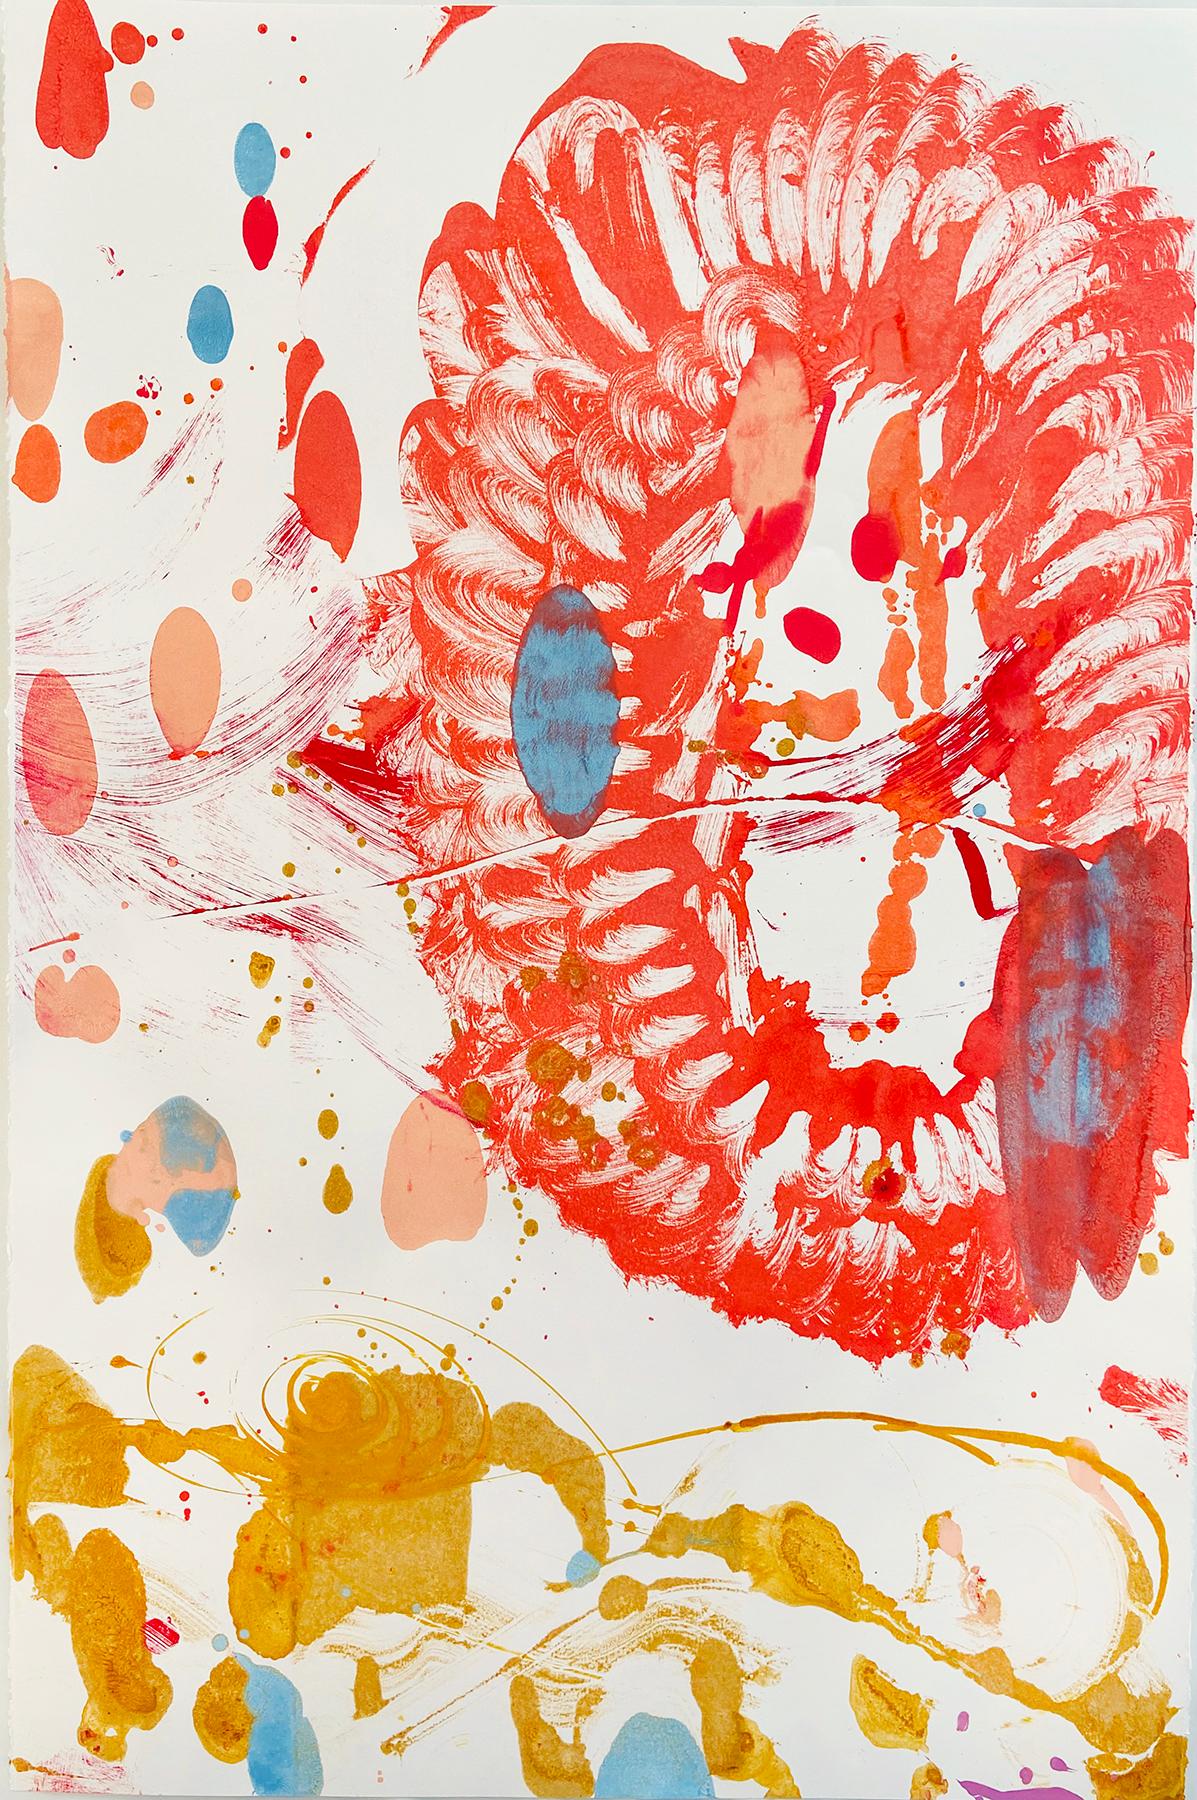 Catherine Howe
Monotype No. 25
2021
Acrylic and mica pigment on full sheet of Stonehenge paper
Signed
40 x 26.5 inches

Installation image: The Beekman, New York, Penthouse suite. 


(b. 1961, United States)

Catherine Howe is a New York artist with